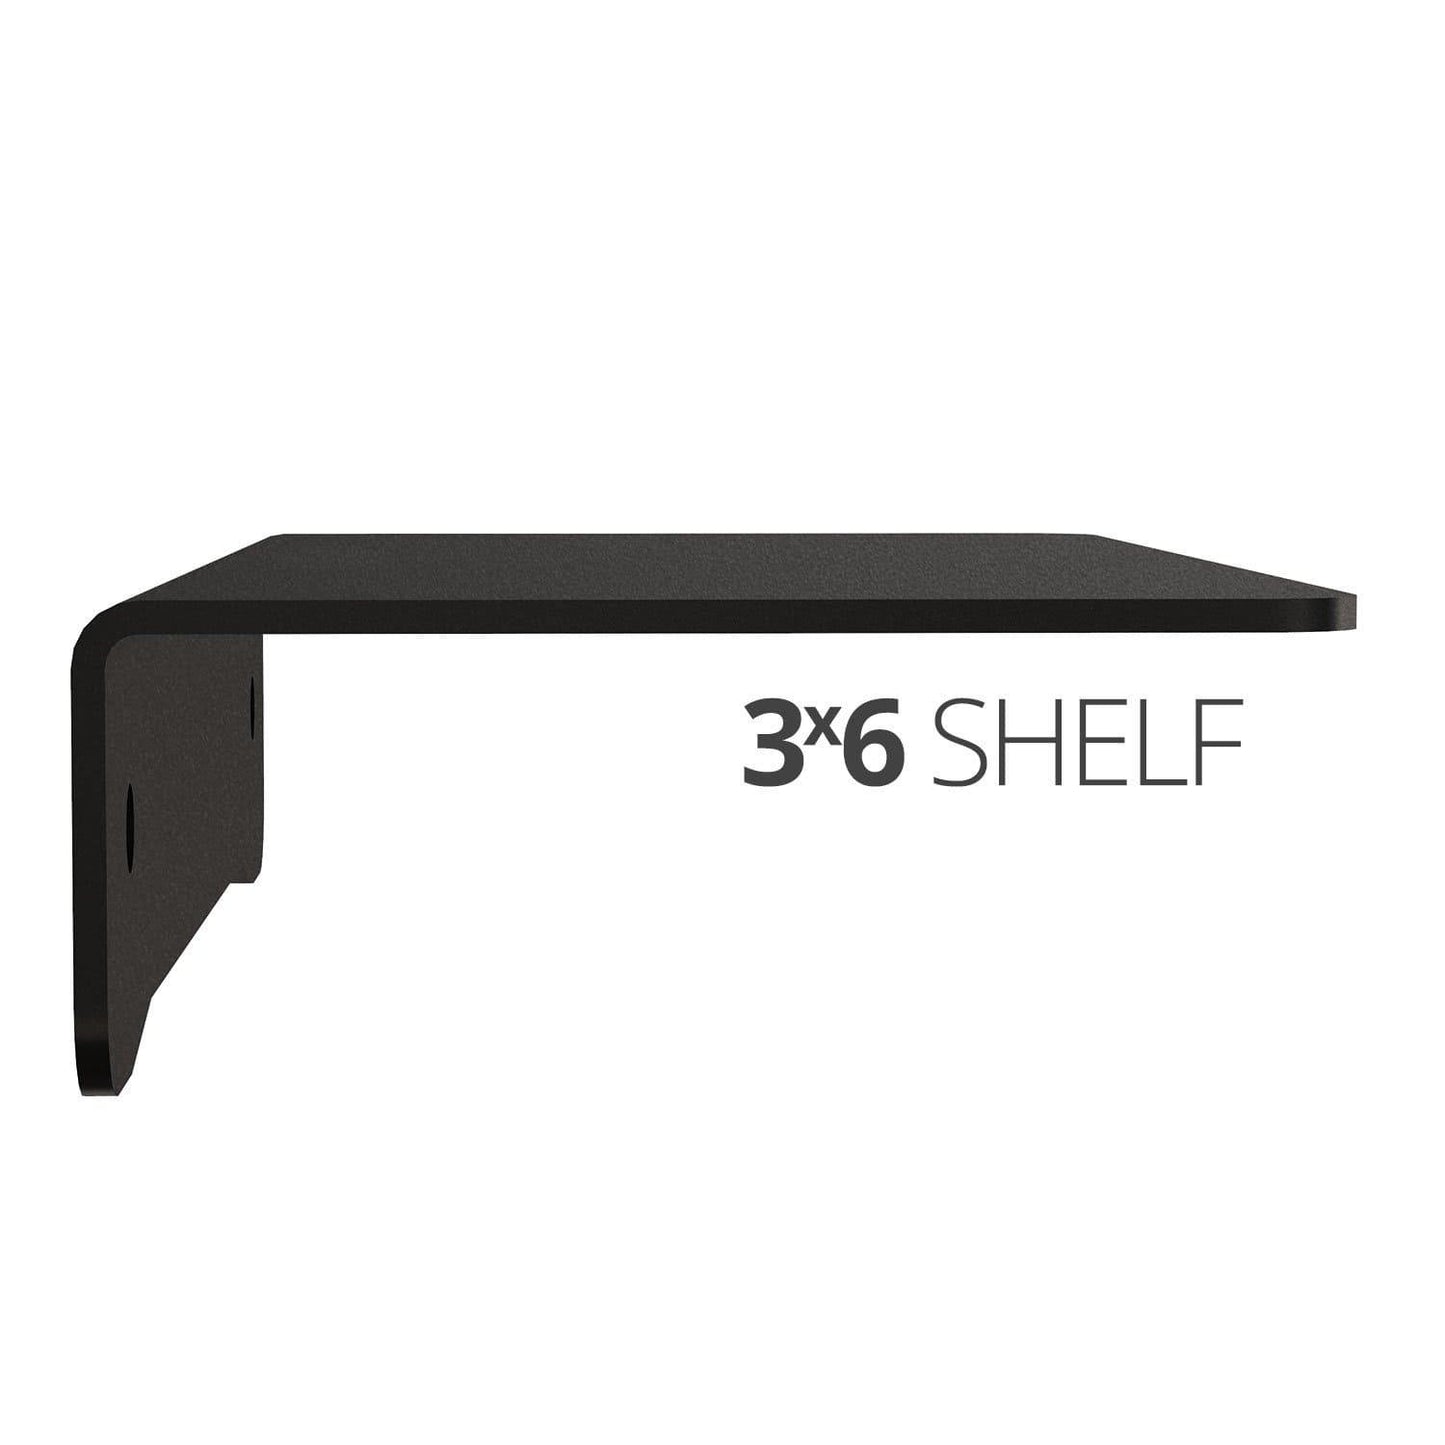 Small wall mounted shelf for home, office and garage - 3x6 side